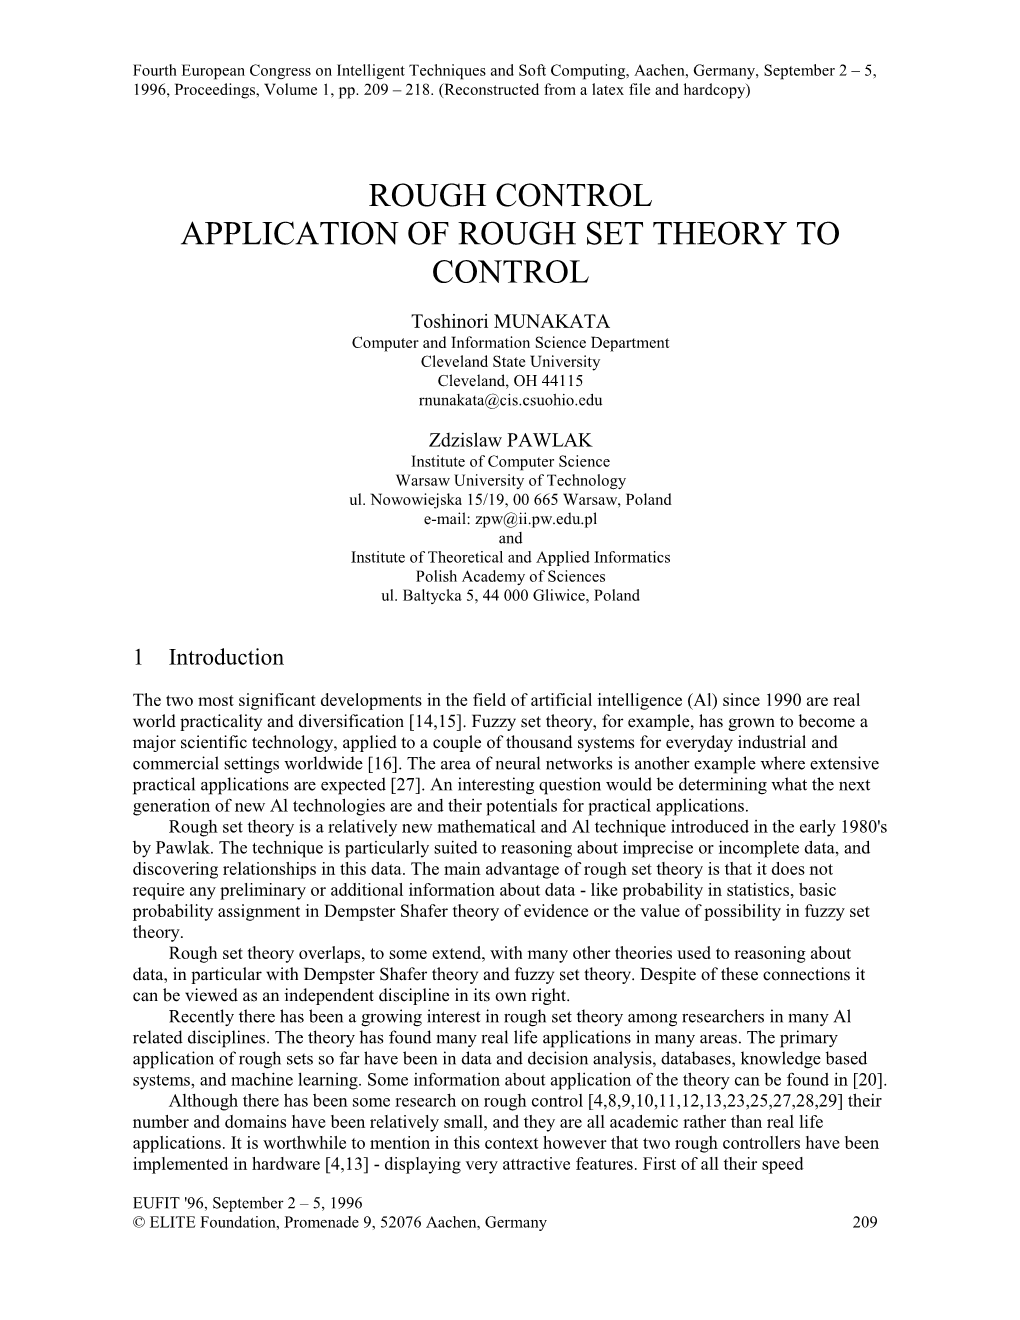 Application of Rough Set Theory to Control